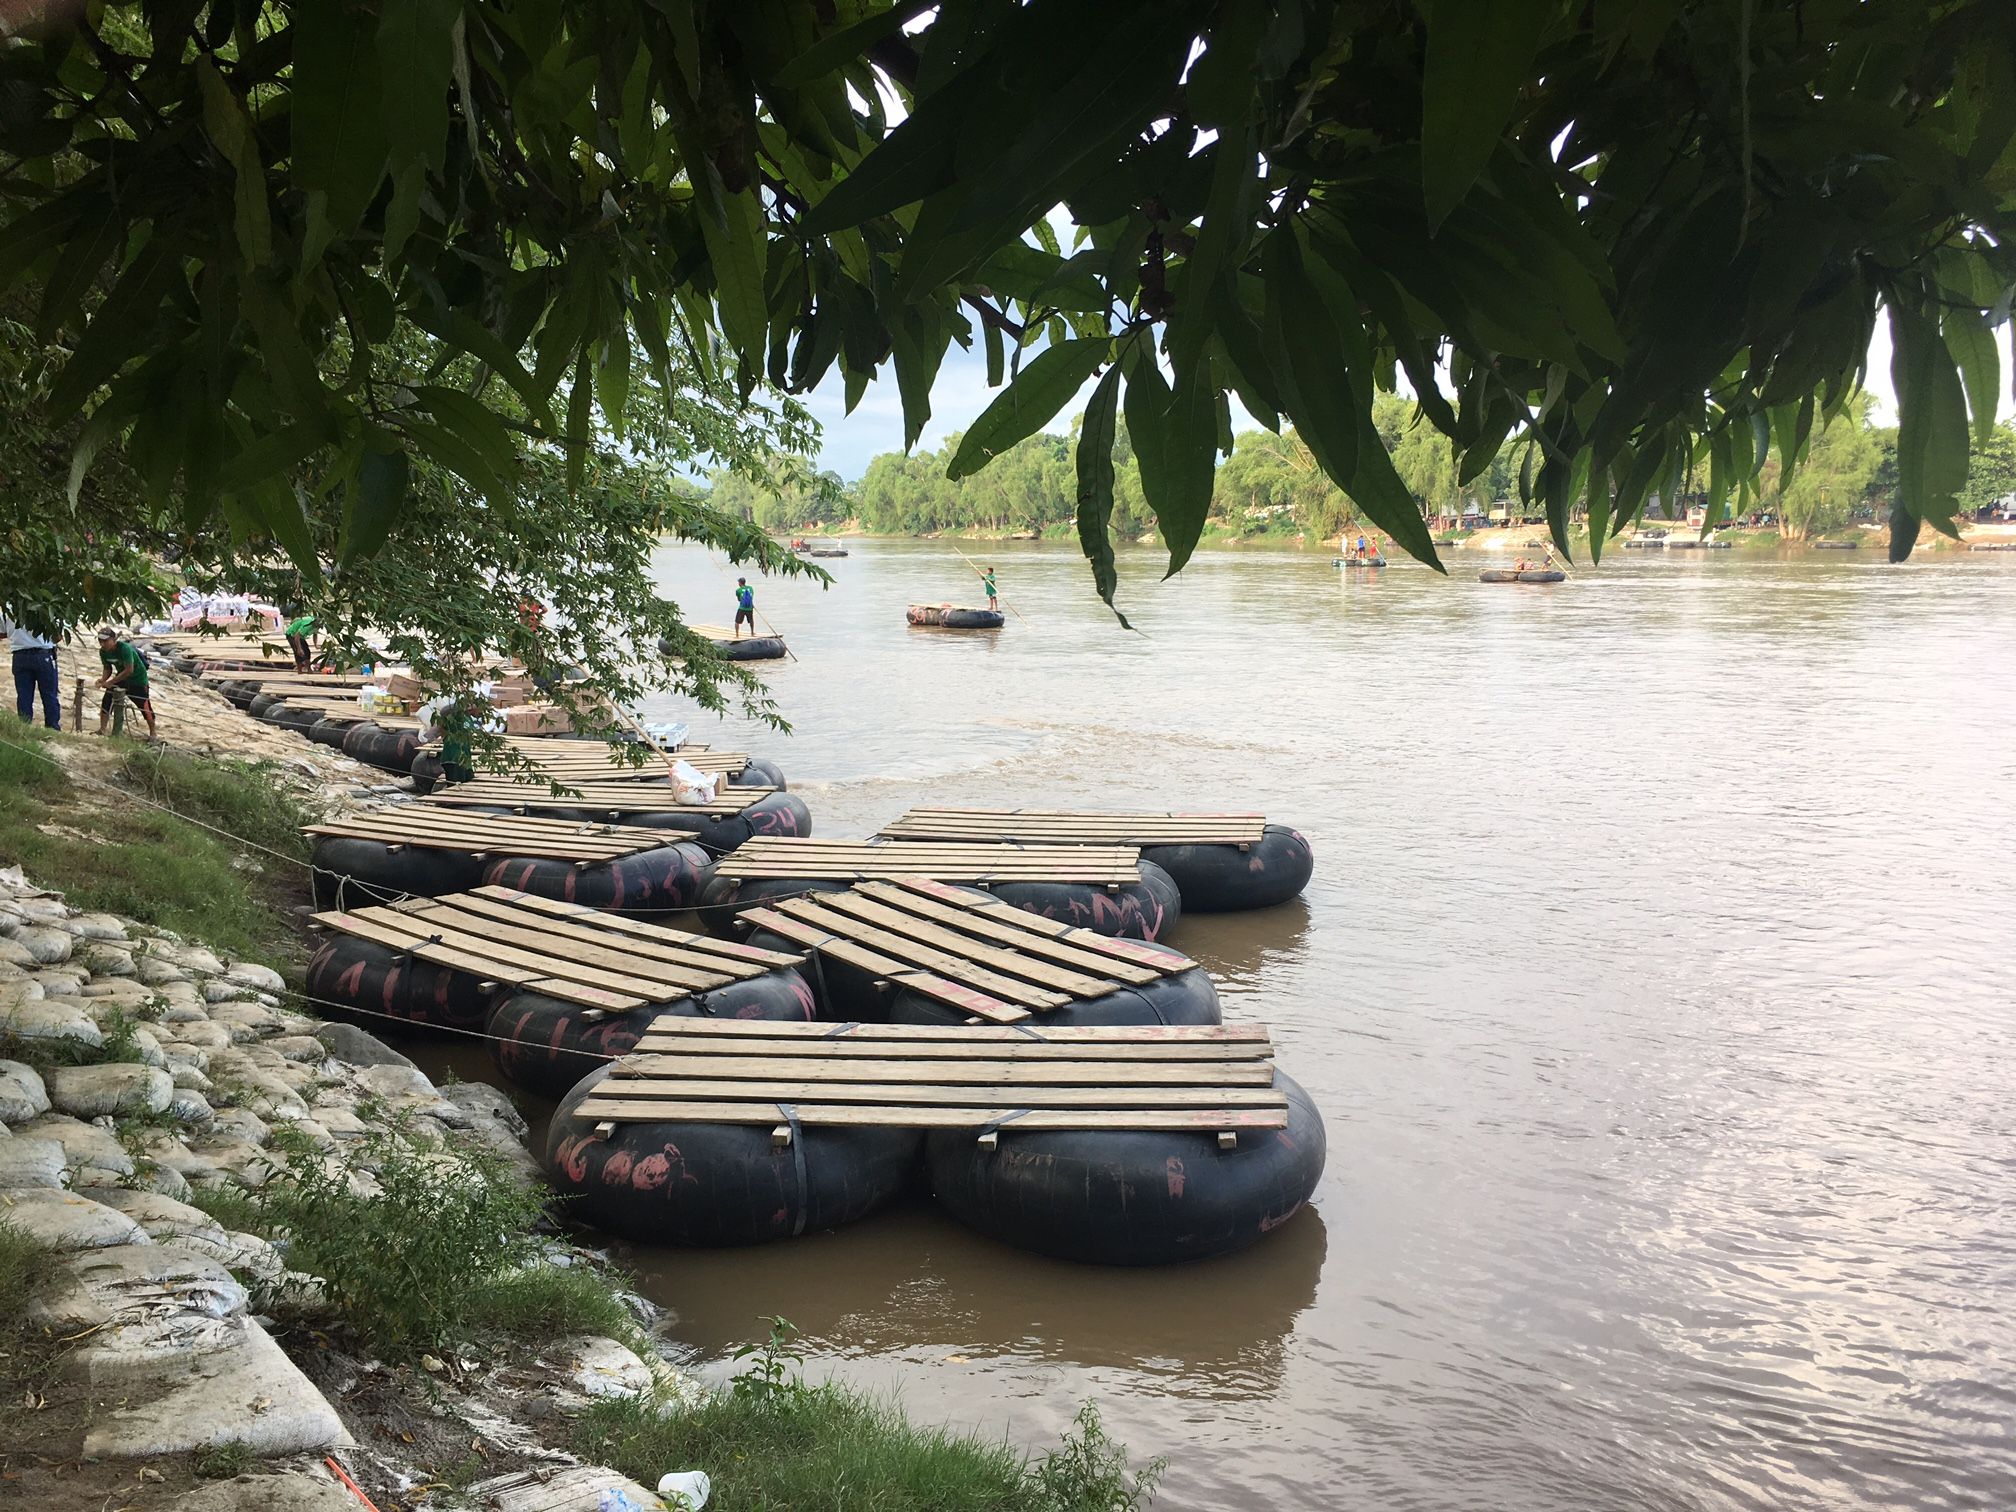 Rafts on the bank of the Suchiate River, which runs between Guatemala and Mexico. These rafts—largely ferrying market-goers and vendors—are also frequently used by U.S.-bound migrants crossing into Mexico. Image by Lauren Markham. Guatemala, 2018.